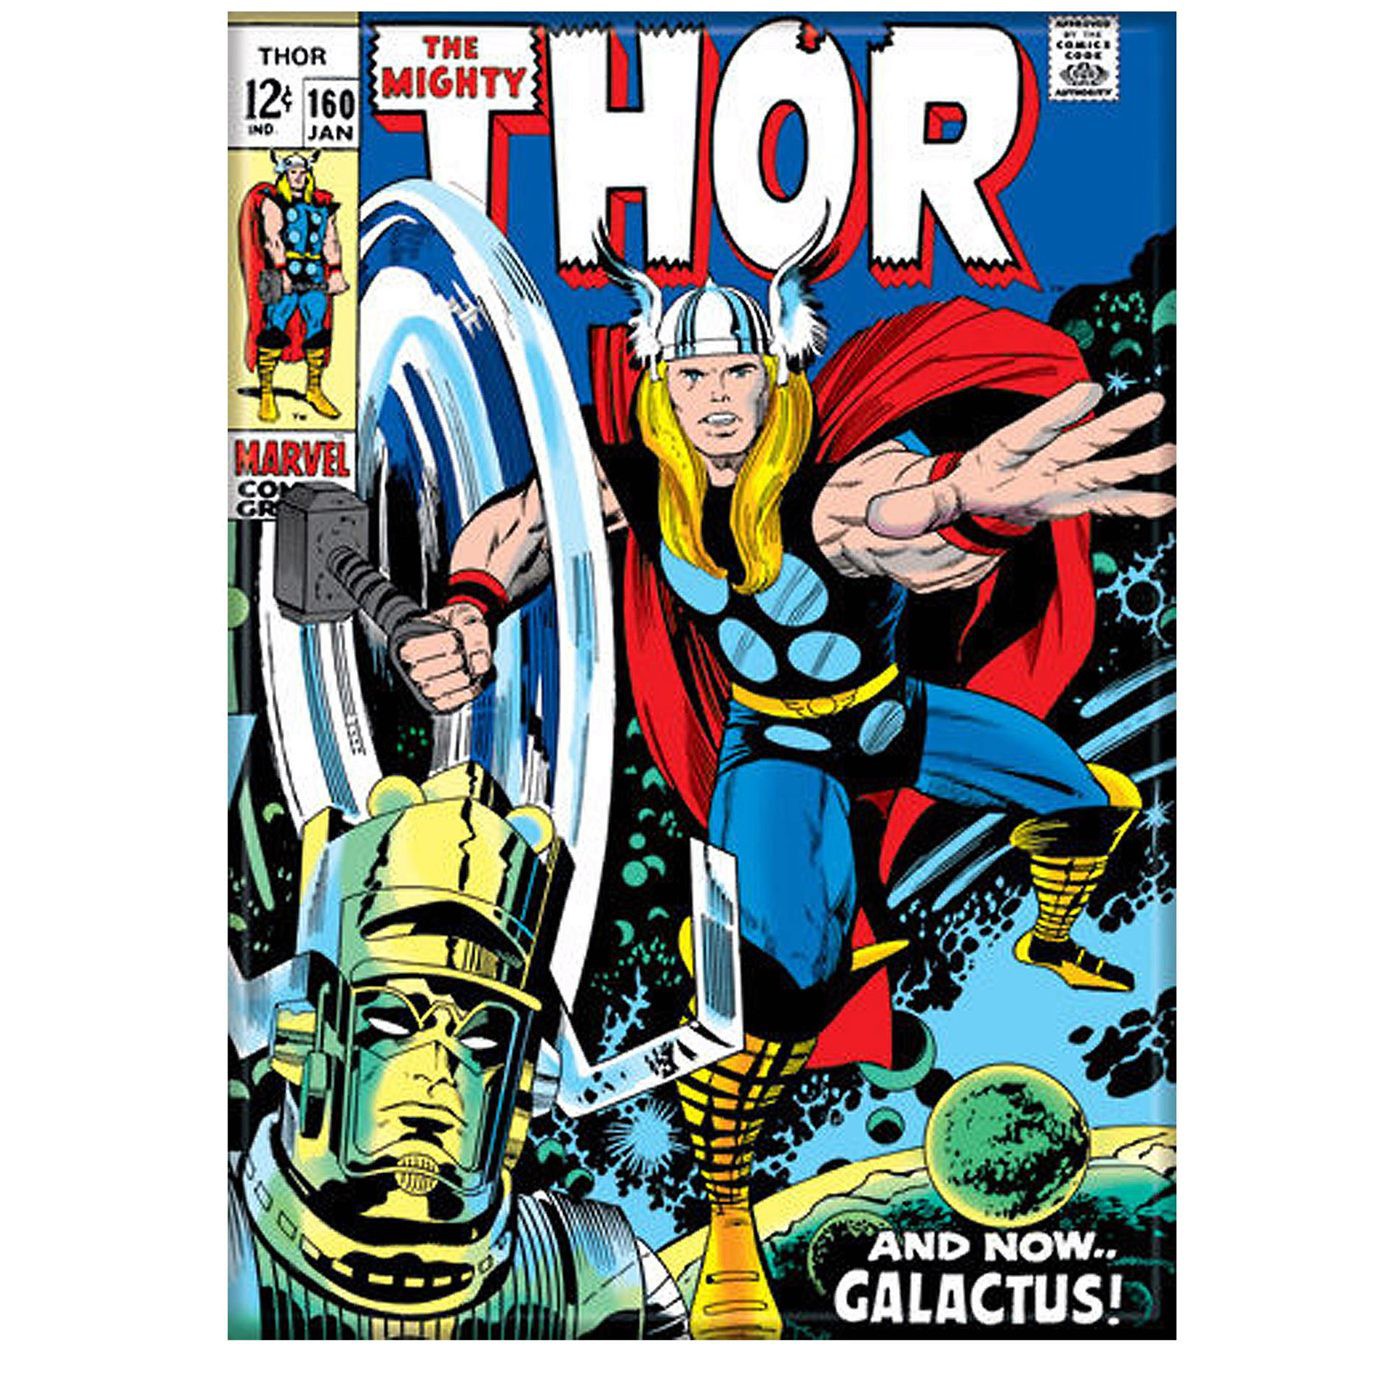 Thor Issue #160 Comic Cover Magnet